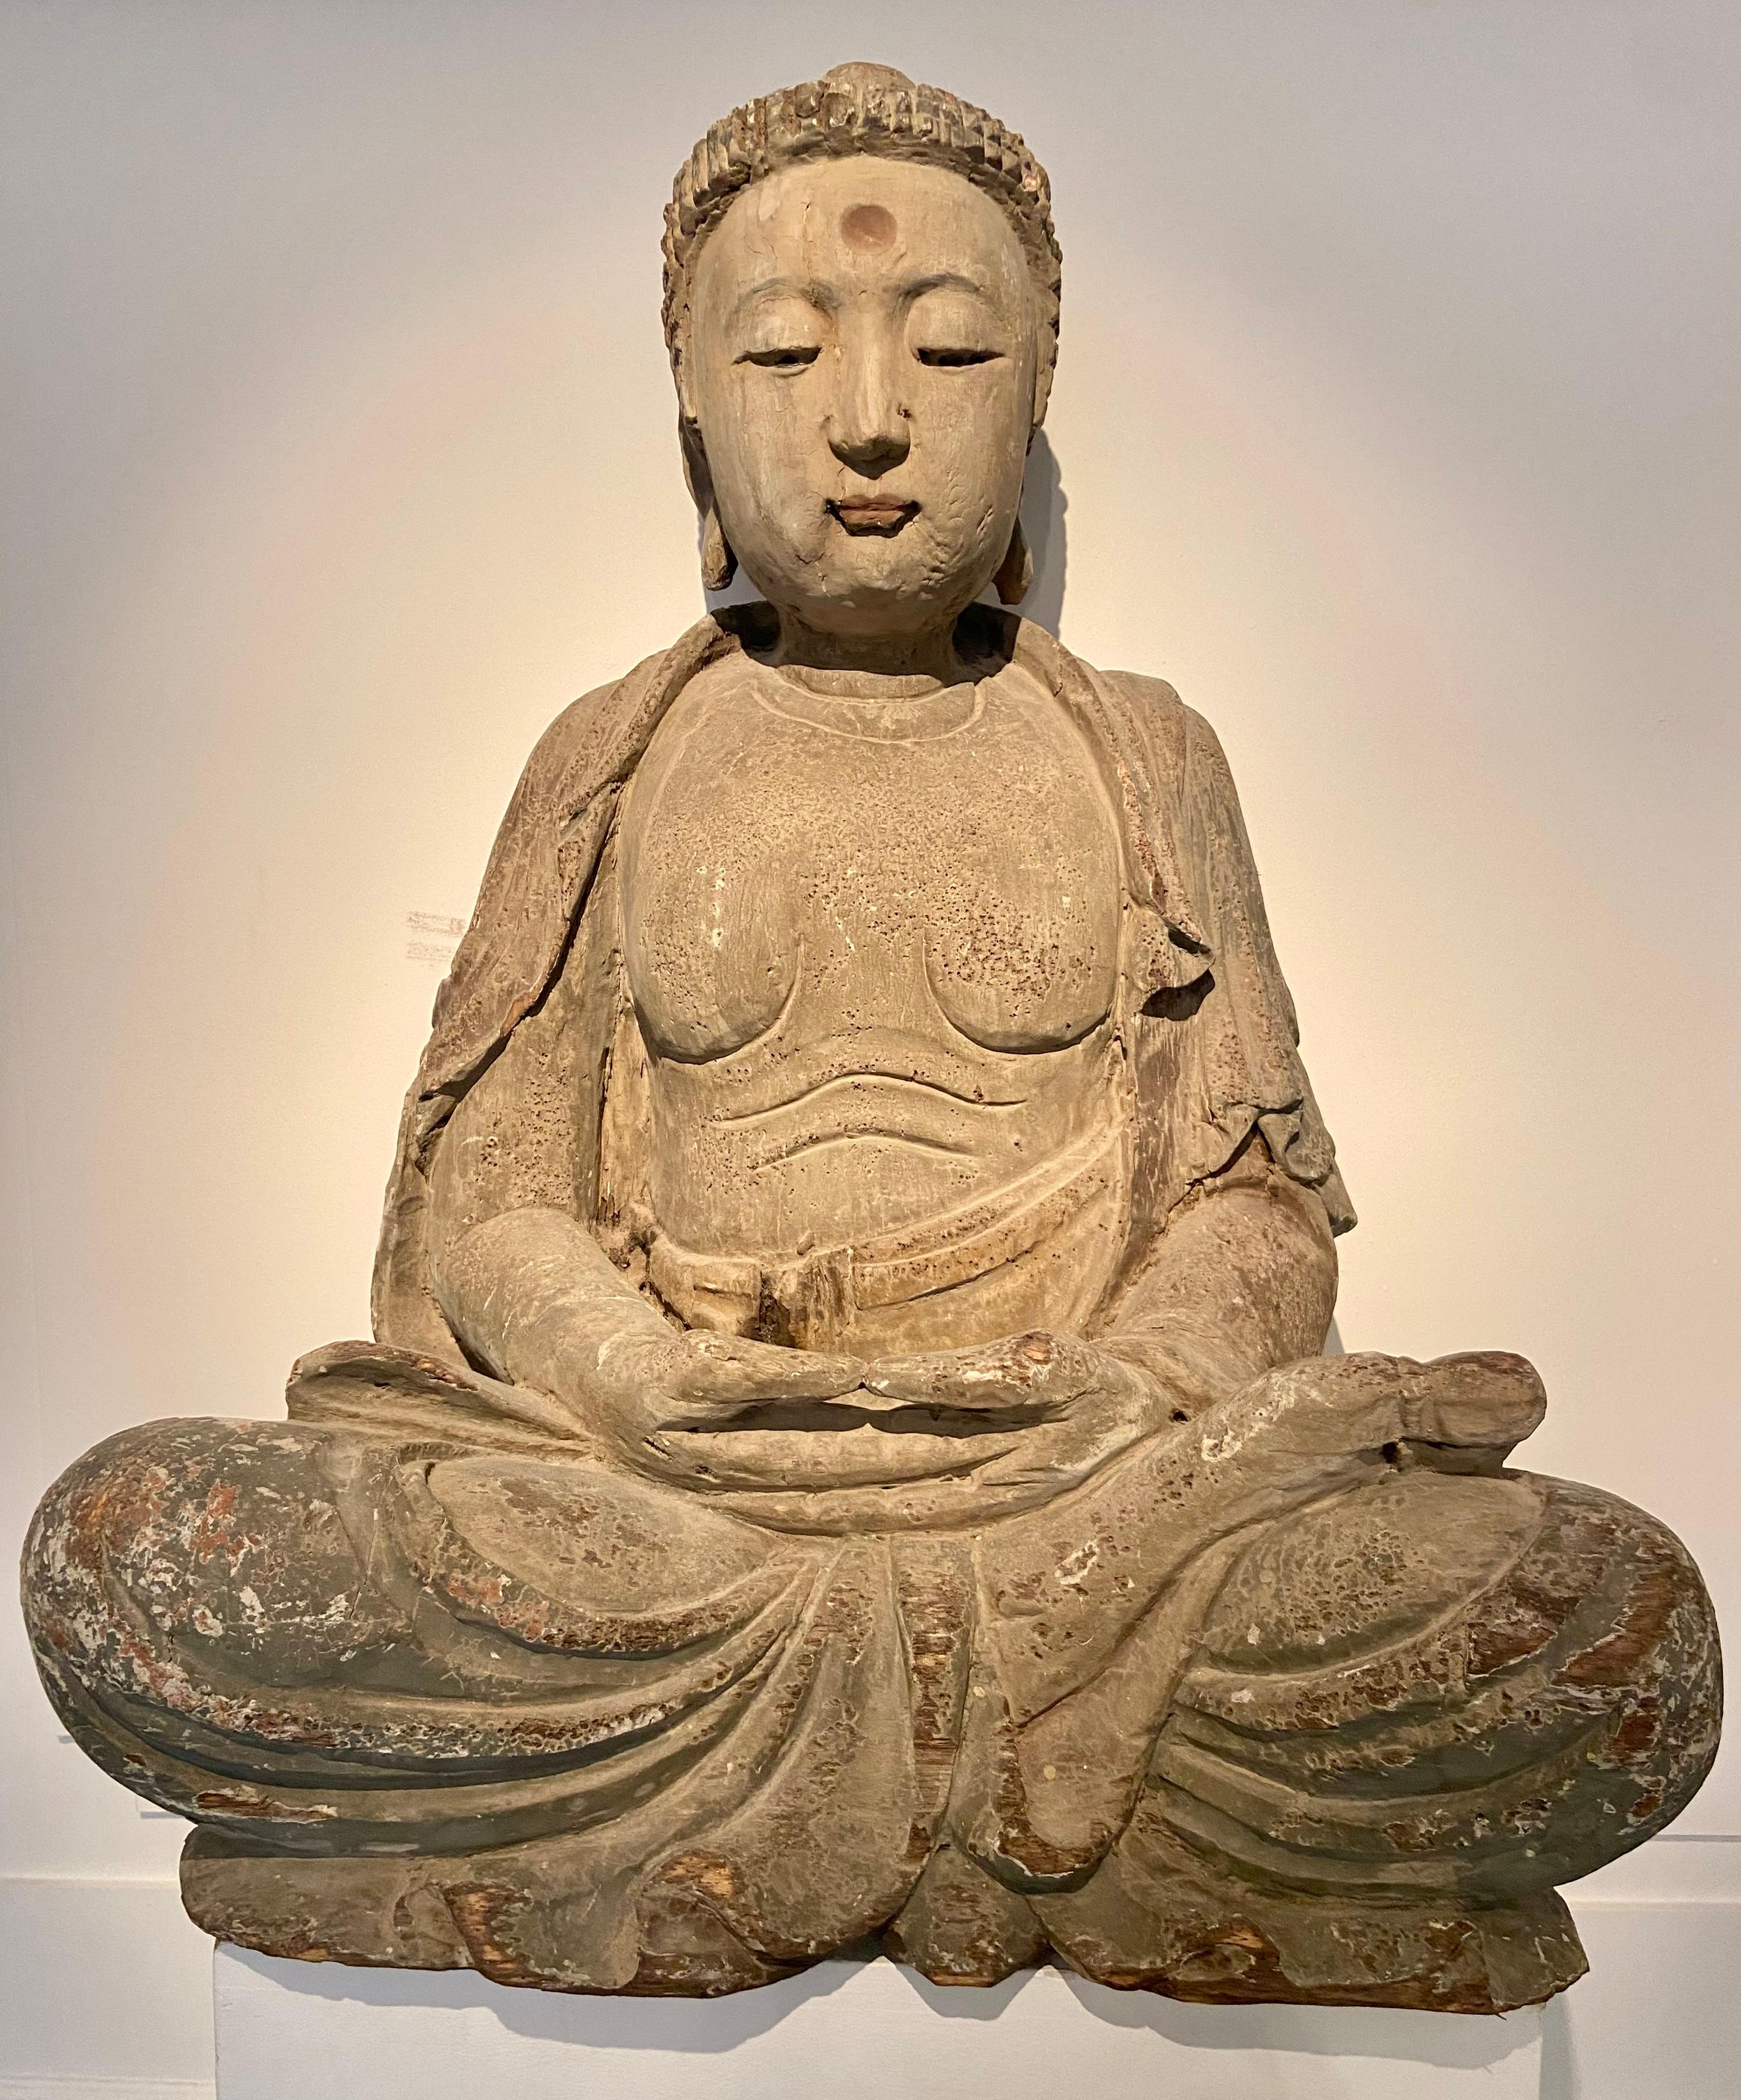 Chinese wooden Buddha, 19th Century.
Impressive sculpture with a good patina.